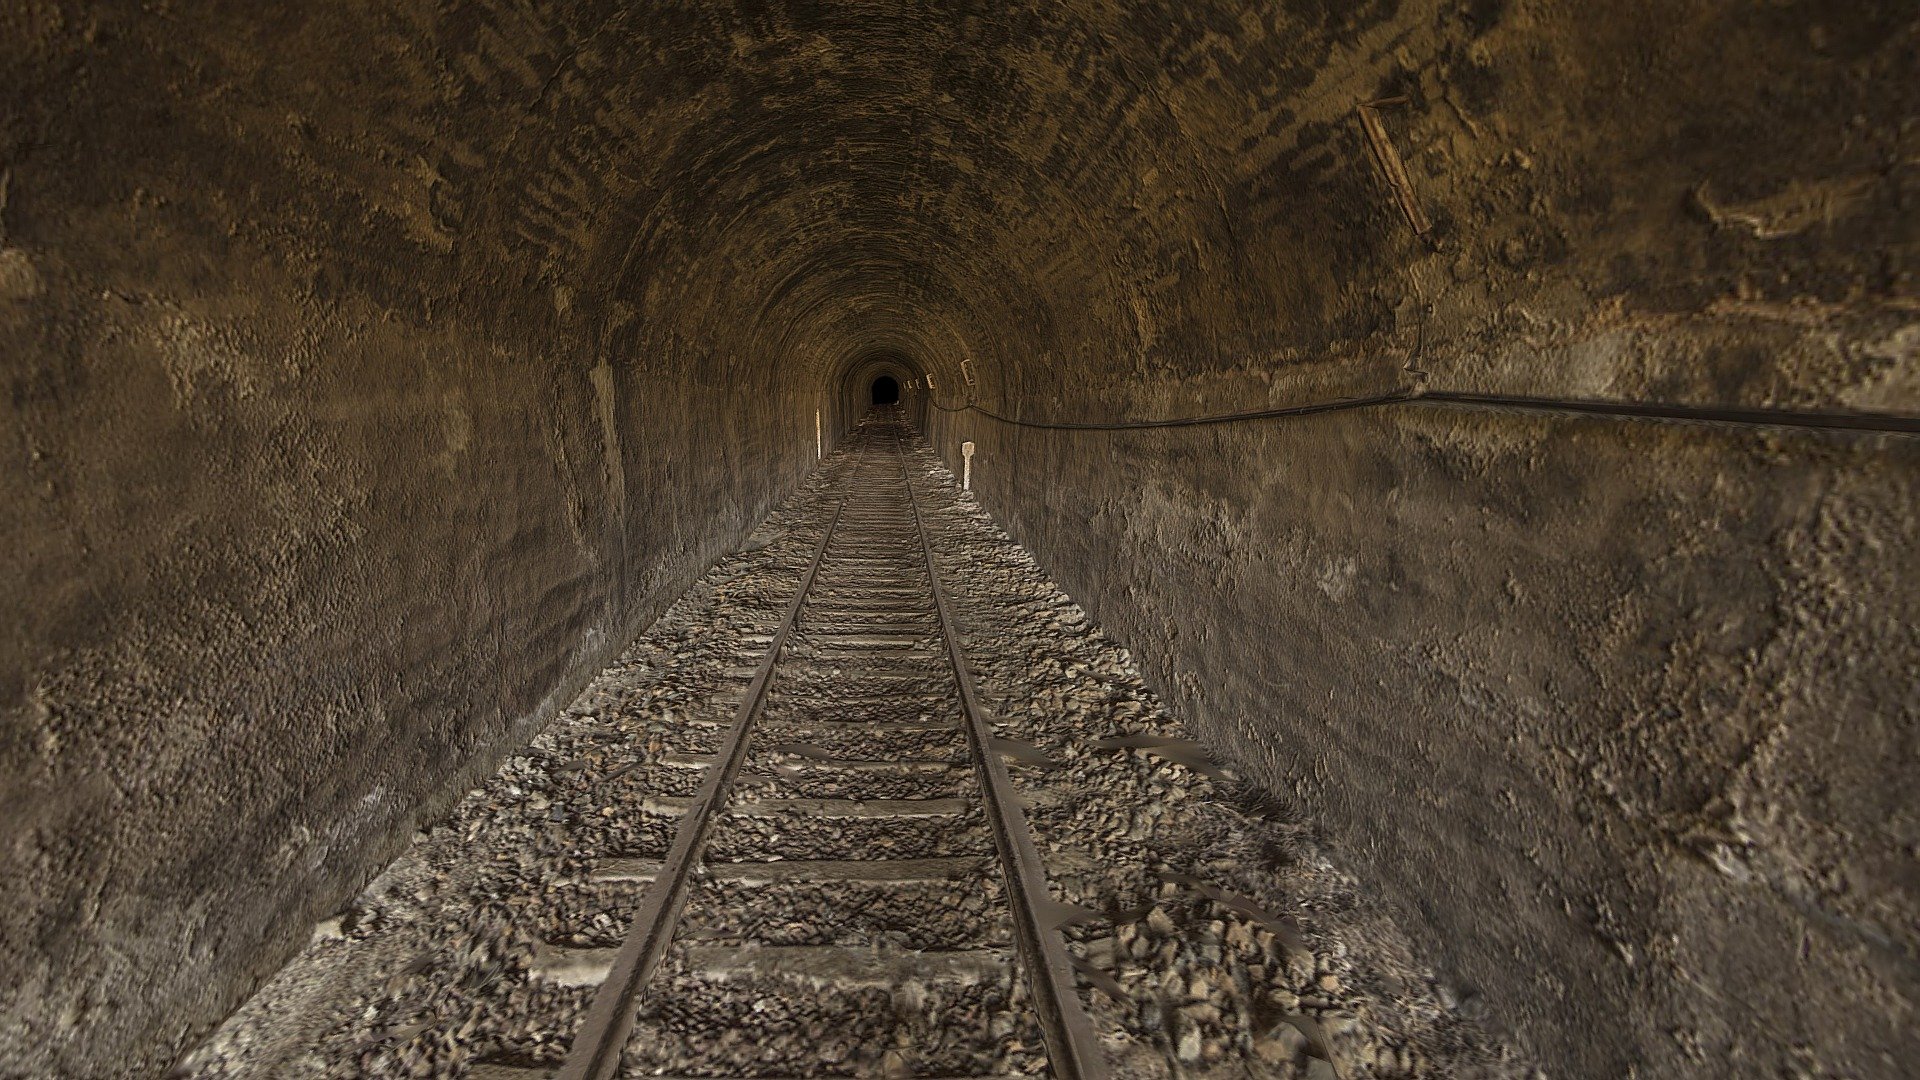 Photogrammetry model of a train tunnel. Perfect for your game scenes, simulations or vfx compositions 3d model